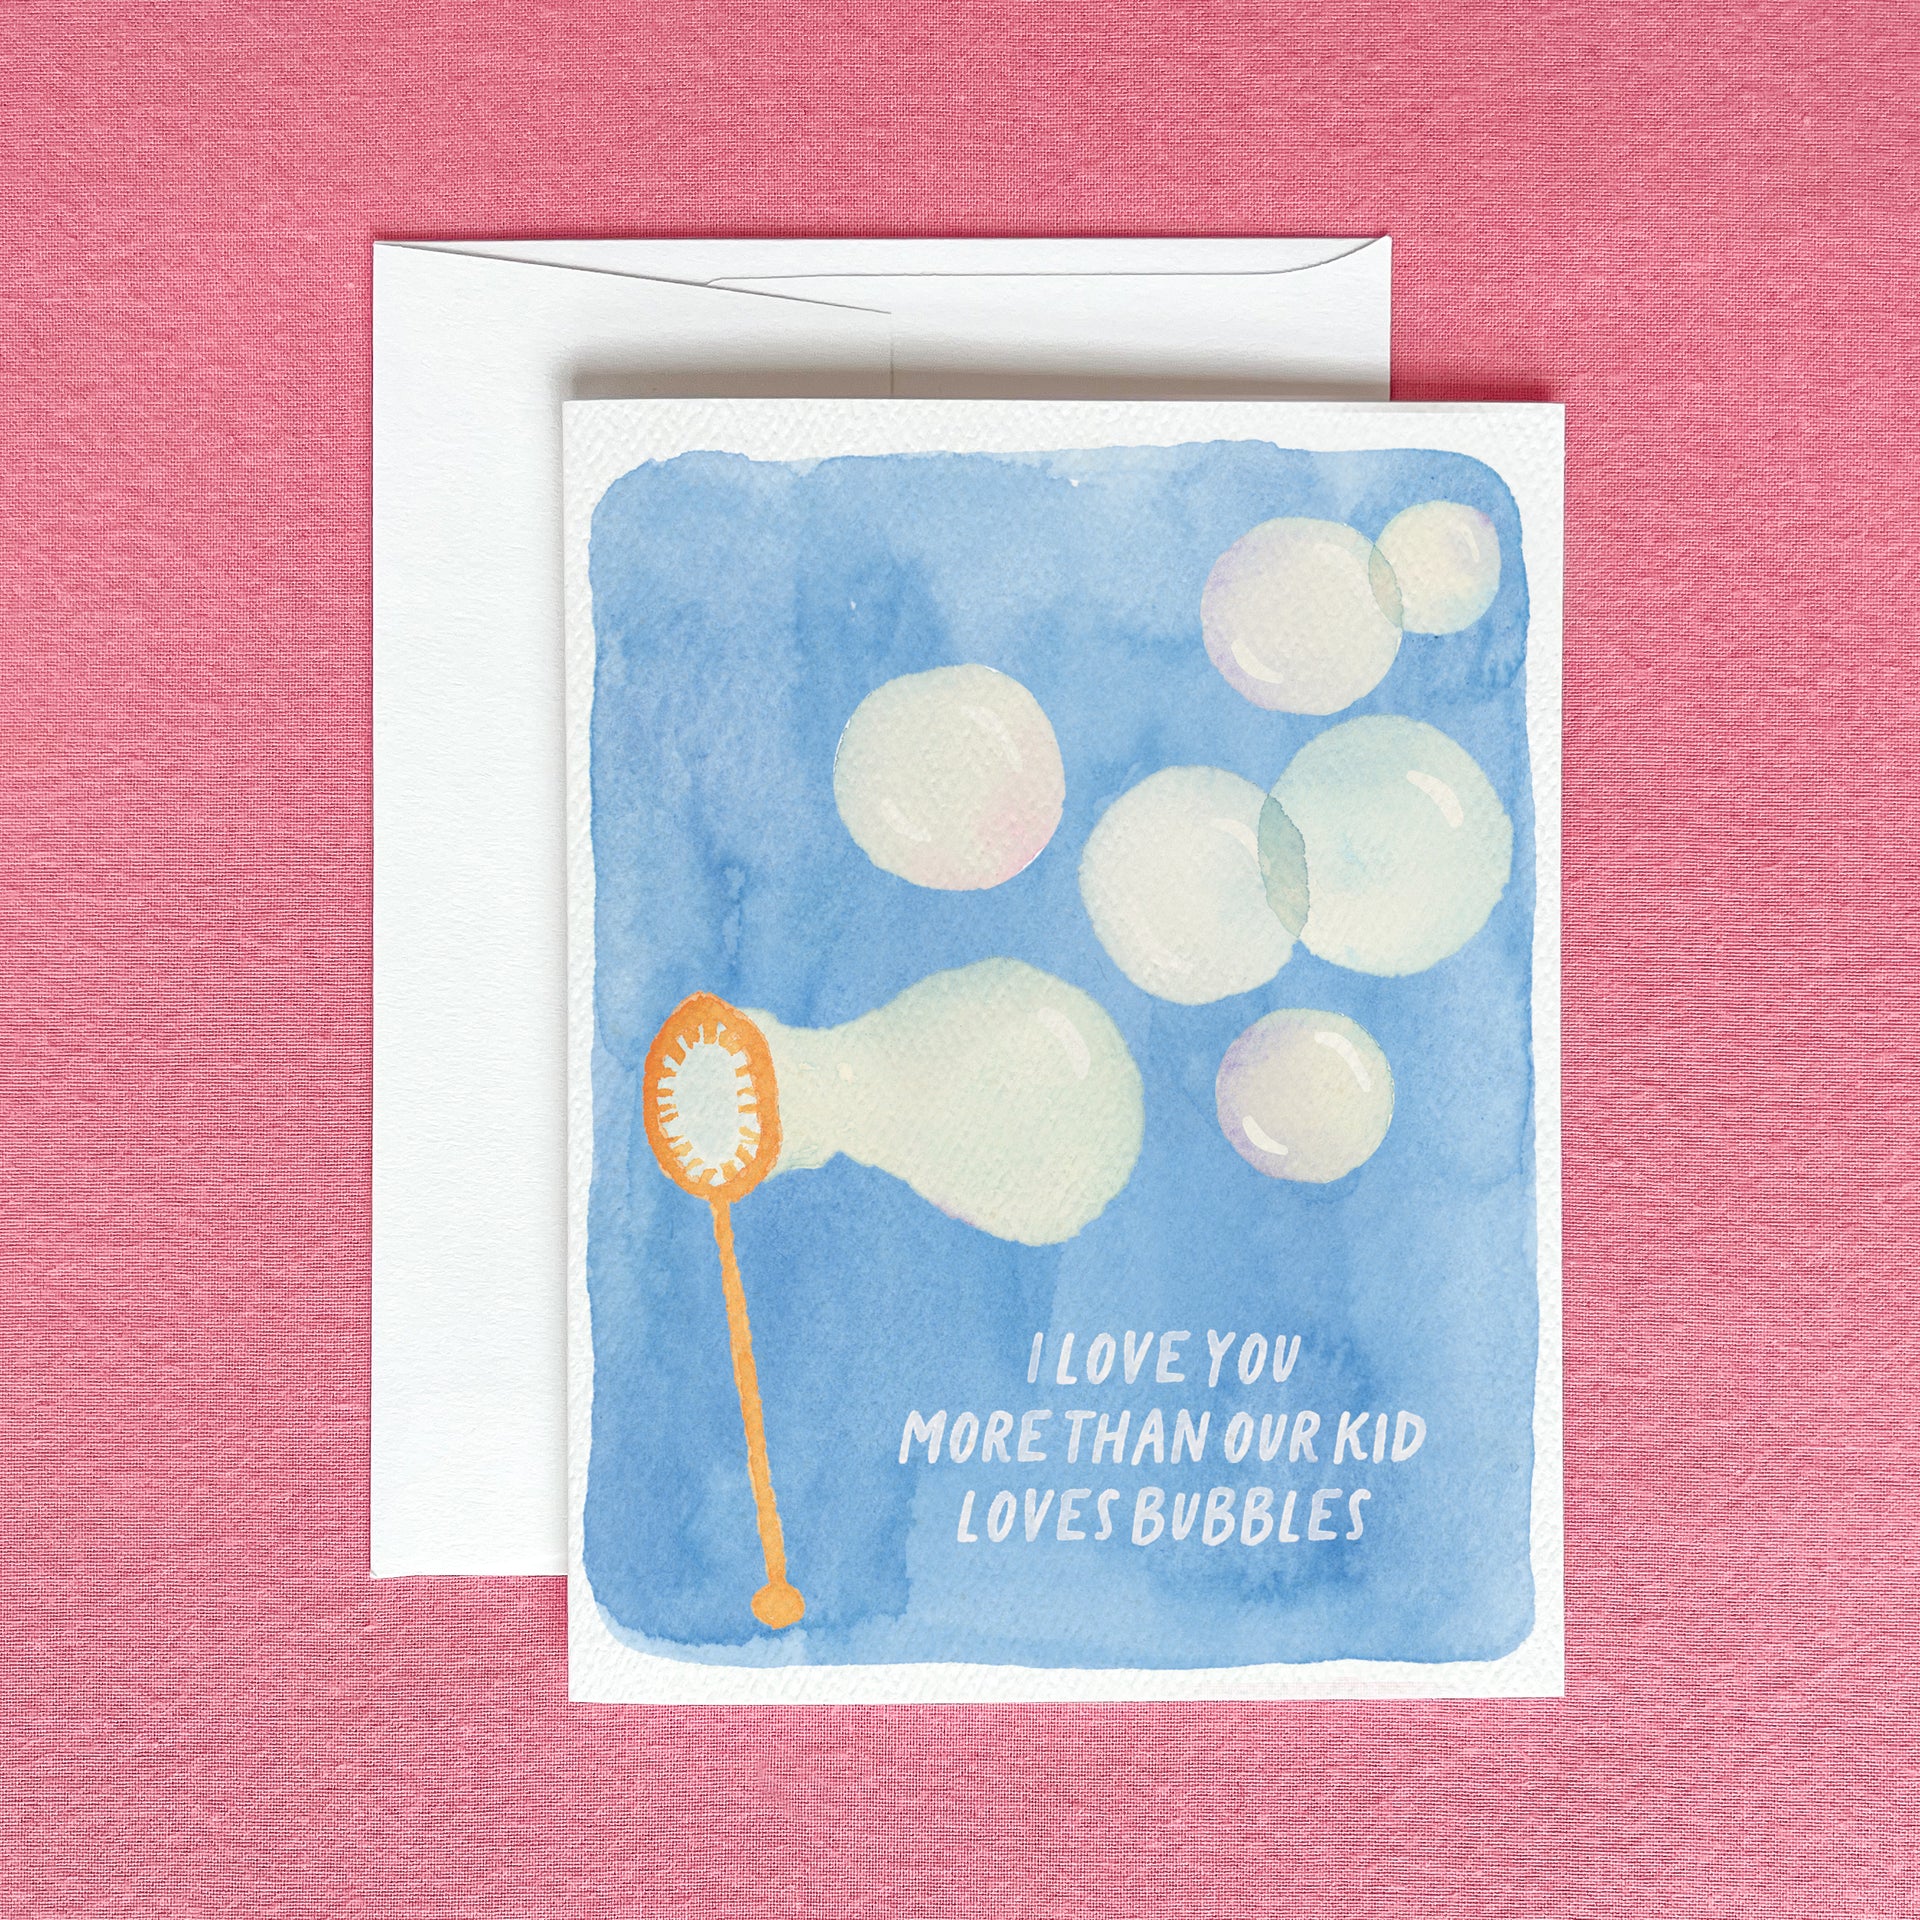 Love You More Than Bubbles Greeting Card by Gert & Co